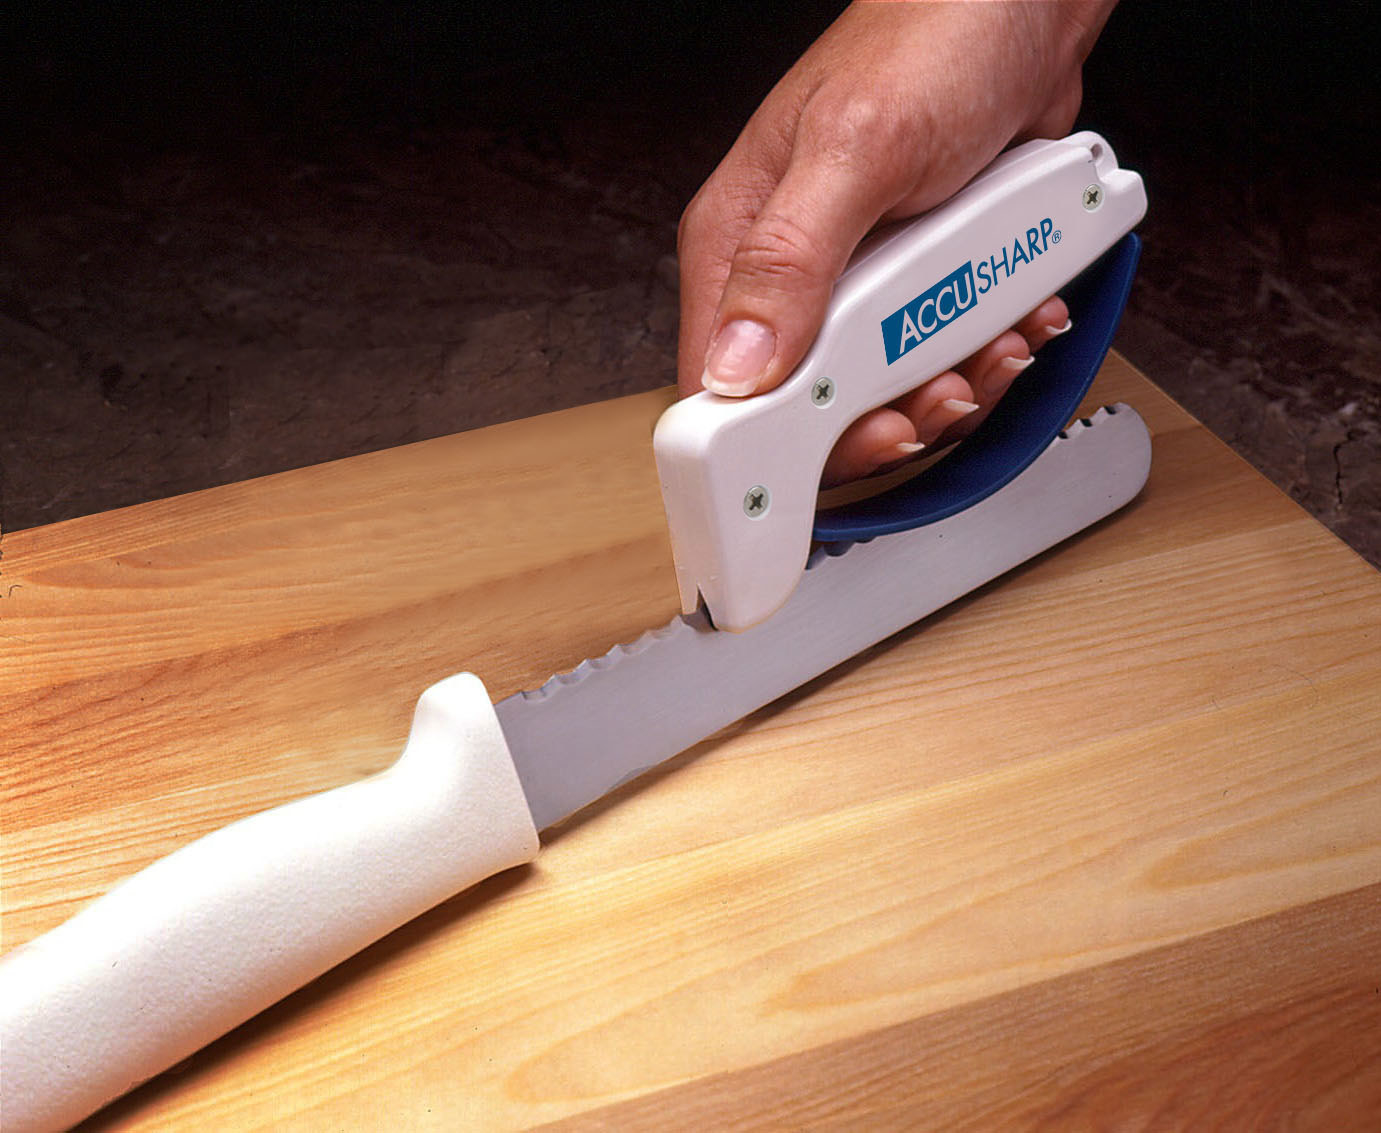 person using accusharp knife sharpener to sharpen a serrated knife